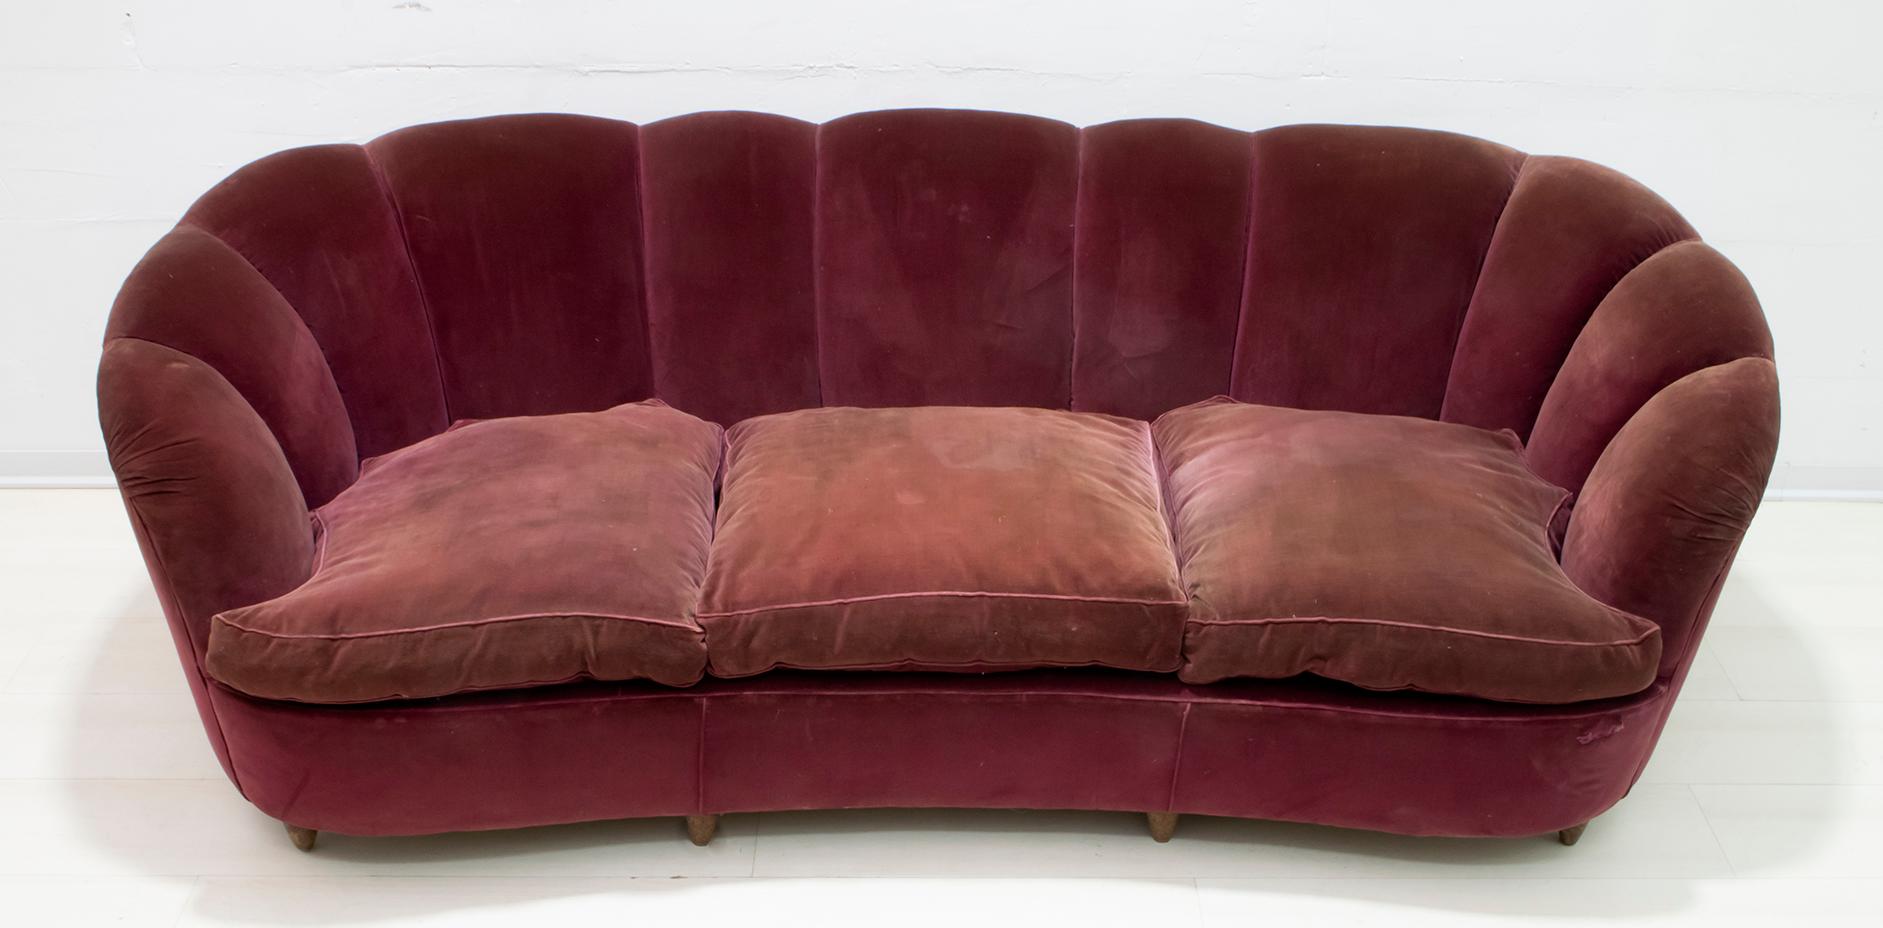 A rare sofa by Gio Ponti for Casa e Giardino, 1936.
Shell model covered in original velvet of the time, with goose down cushions. The coating, as shown in the photo, has faded in some parts and worn out. It is recommended to redo the